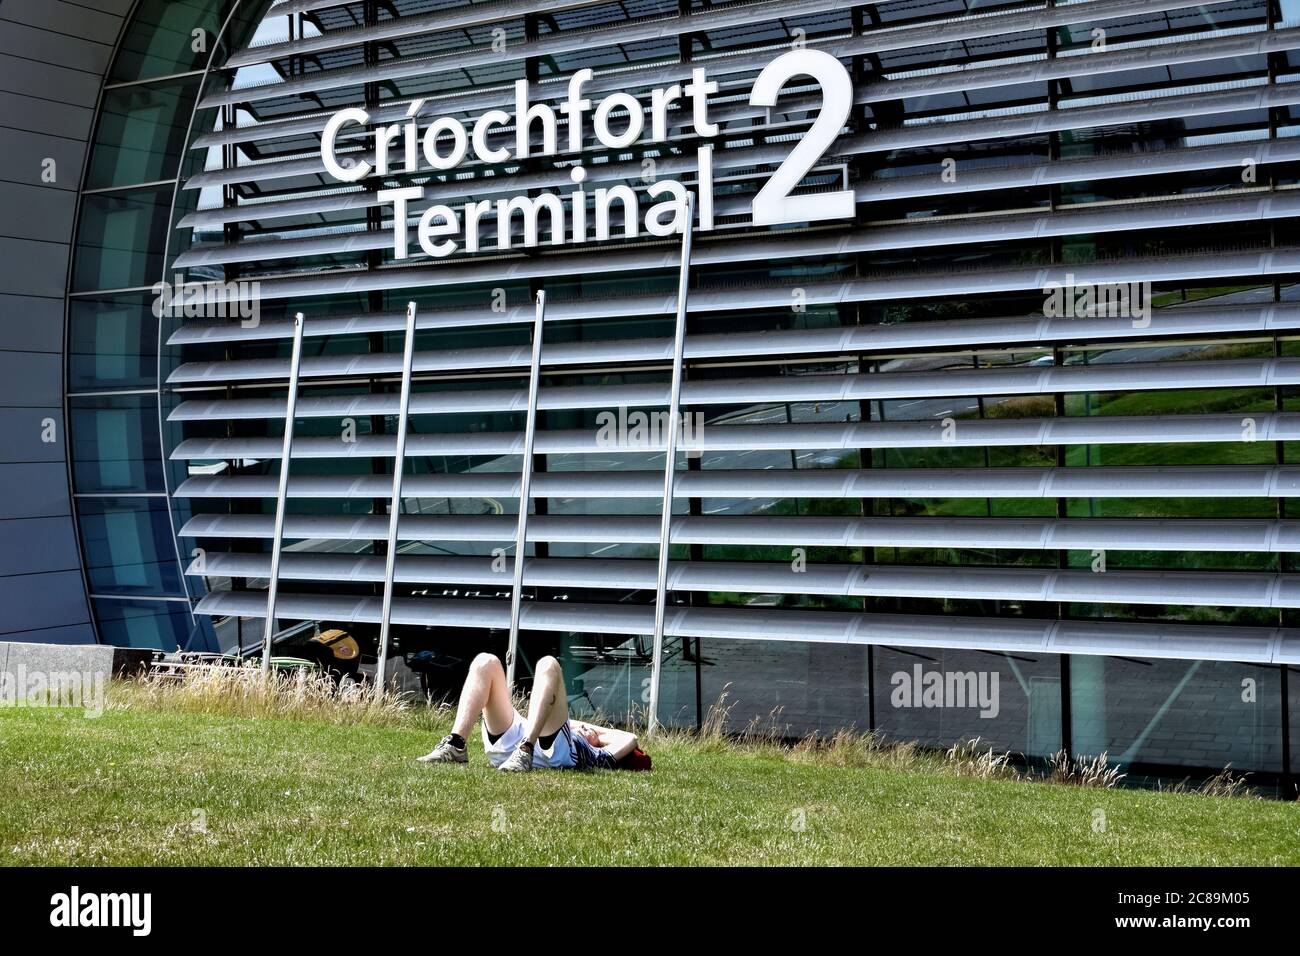 New Terminal 2, T2 Criochfort Dublin International Airport DUB. Young man in shorts, rests, lying on the grass. Republic of Ireland, Europe, EU. Stock Photo